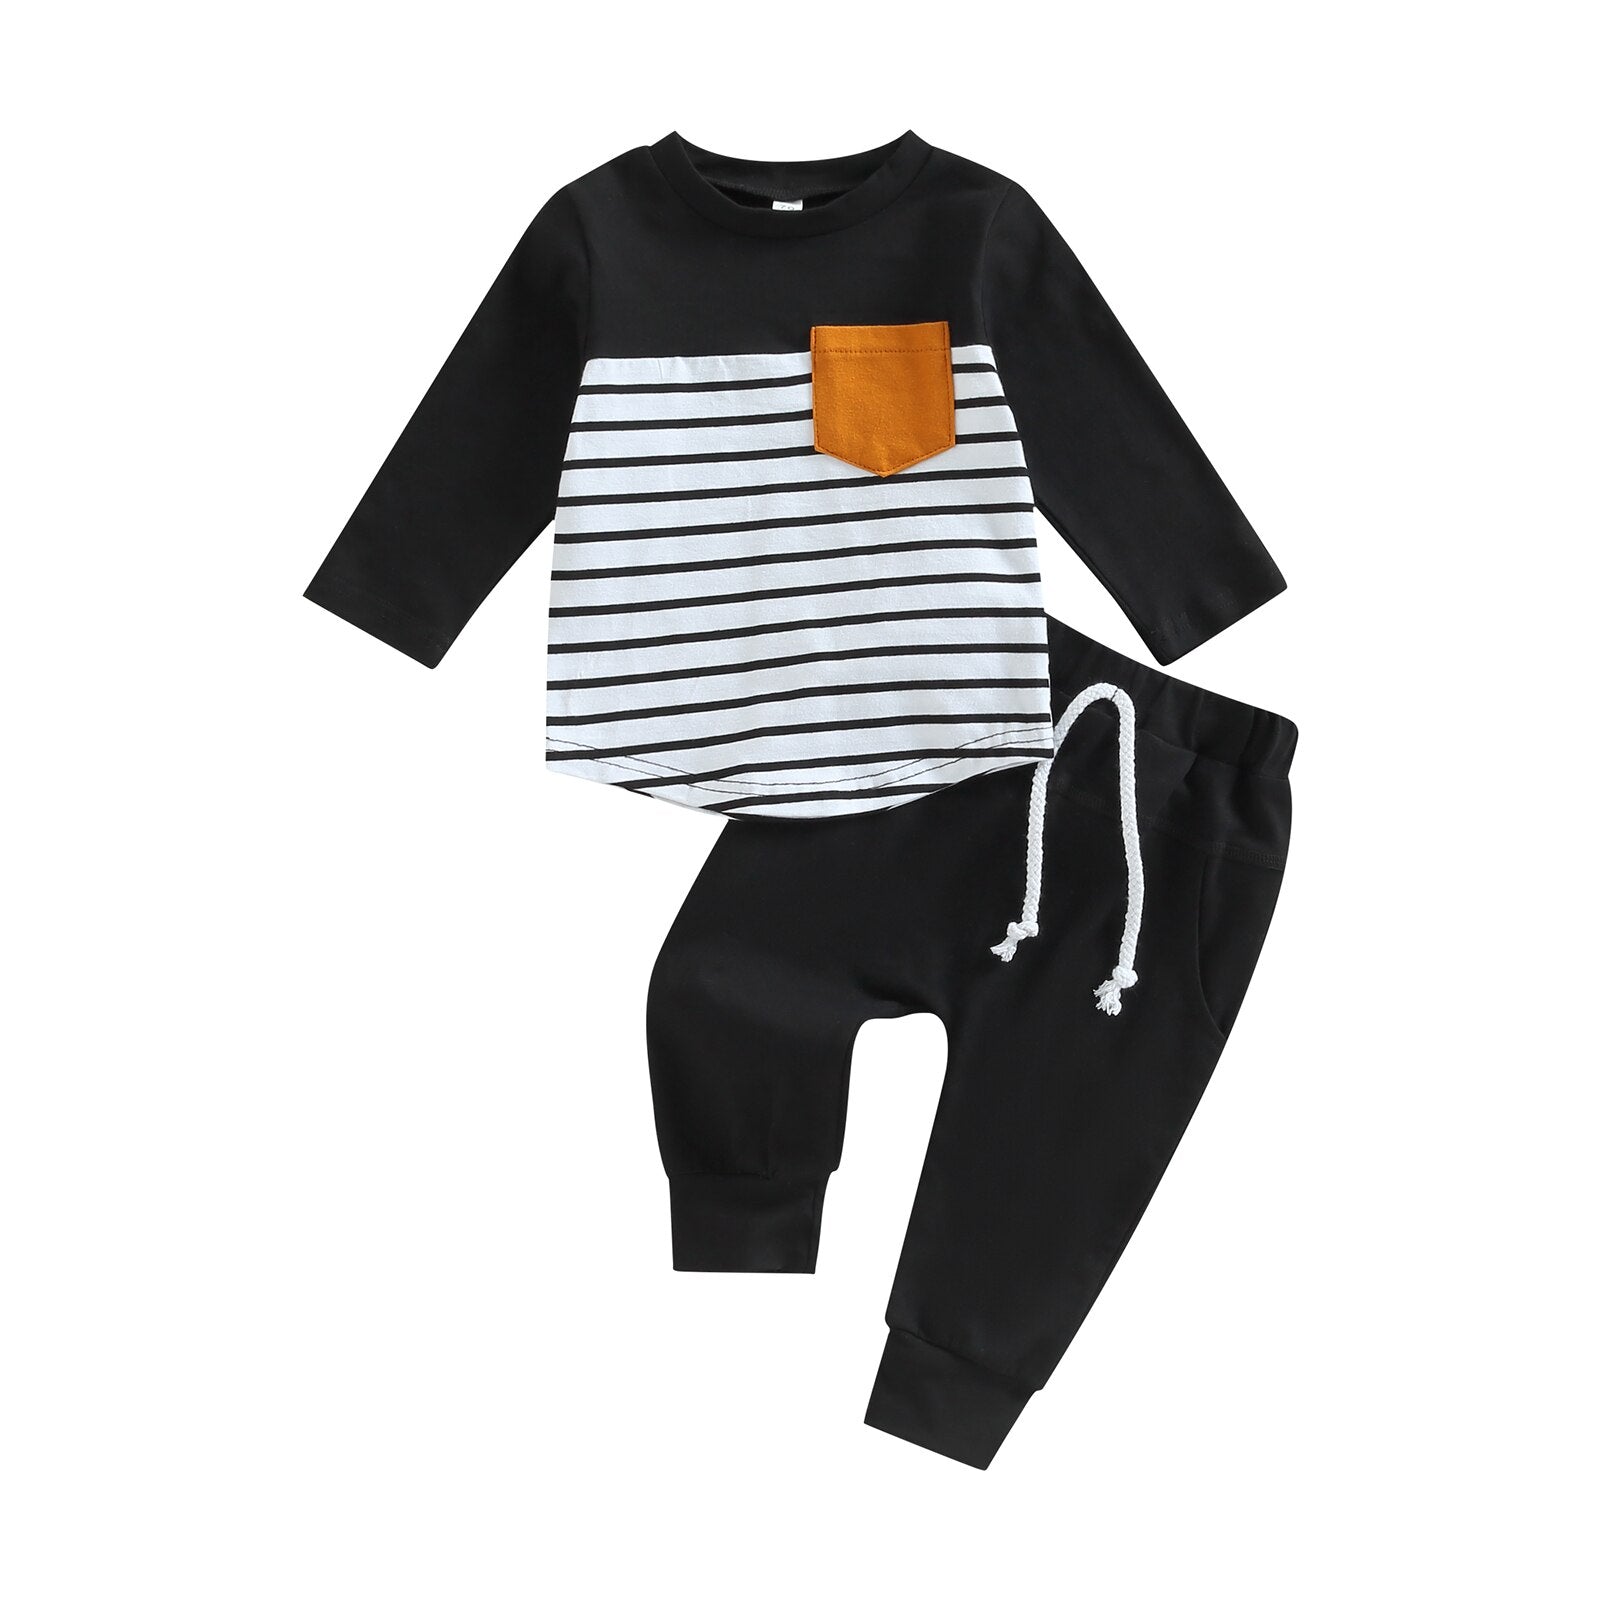 Striped Matching Stretchy Baby Outfit Set